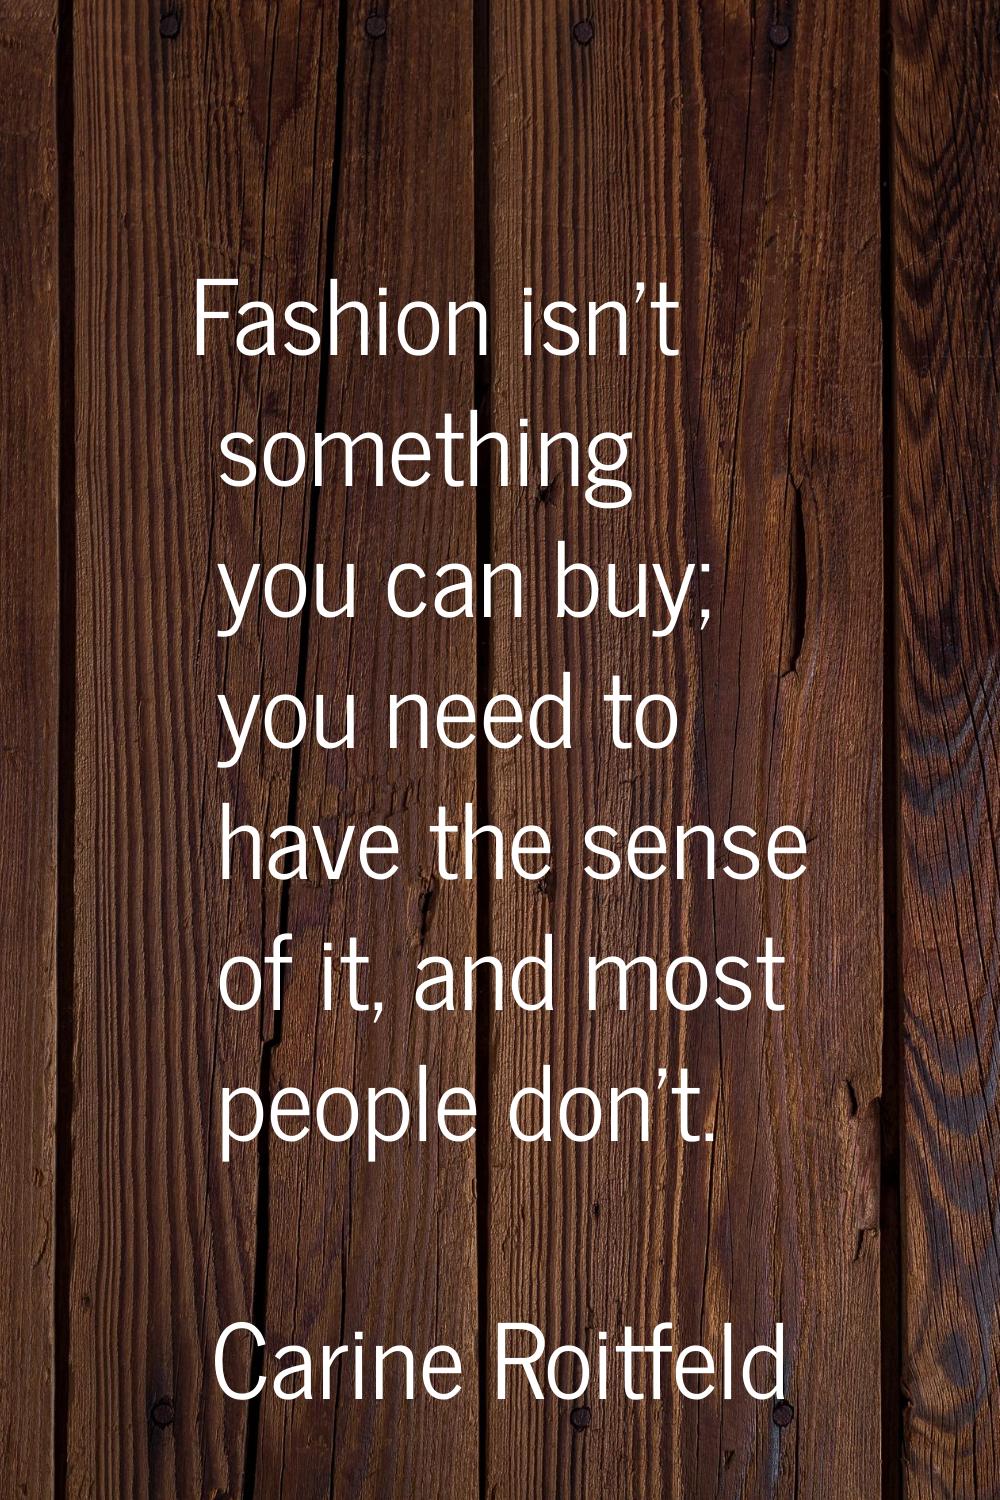 Fashion isn't something you can buy; you need to have the sense of it, and most people don't.